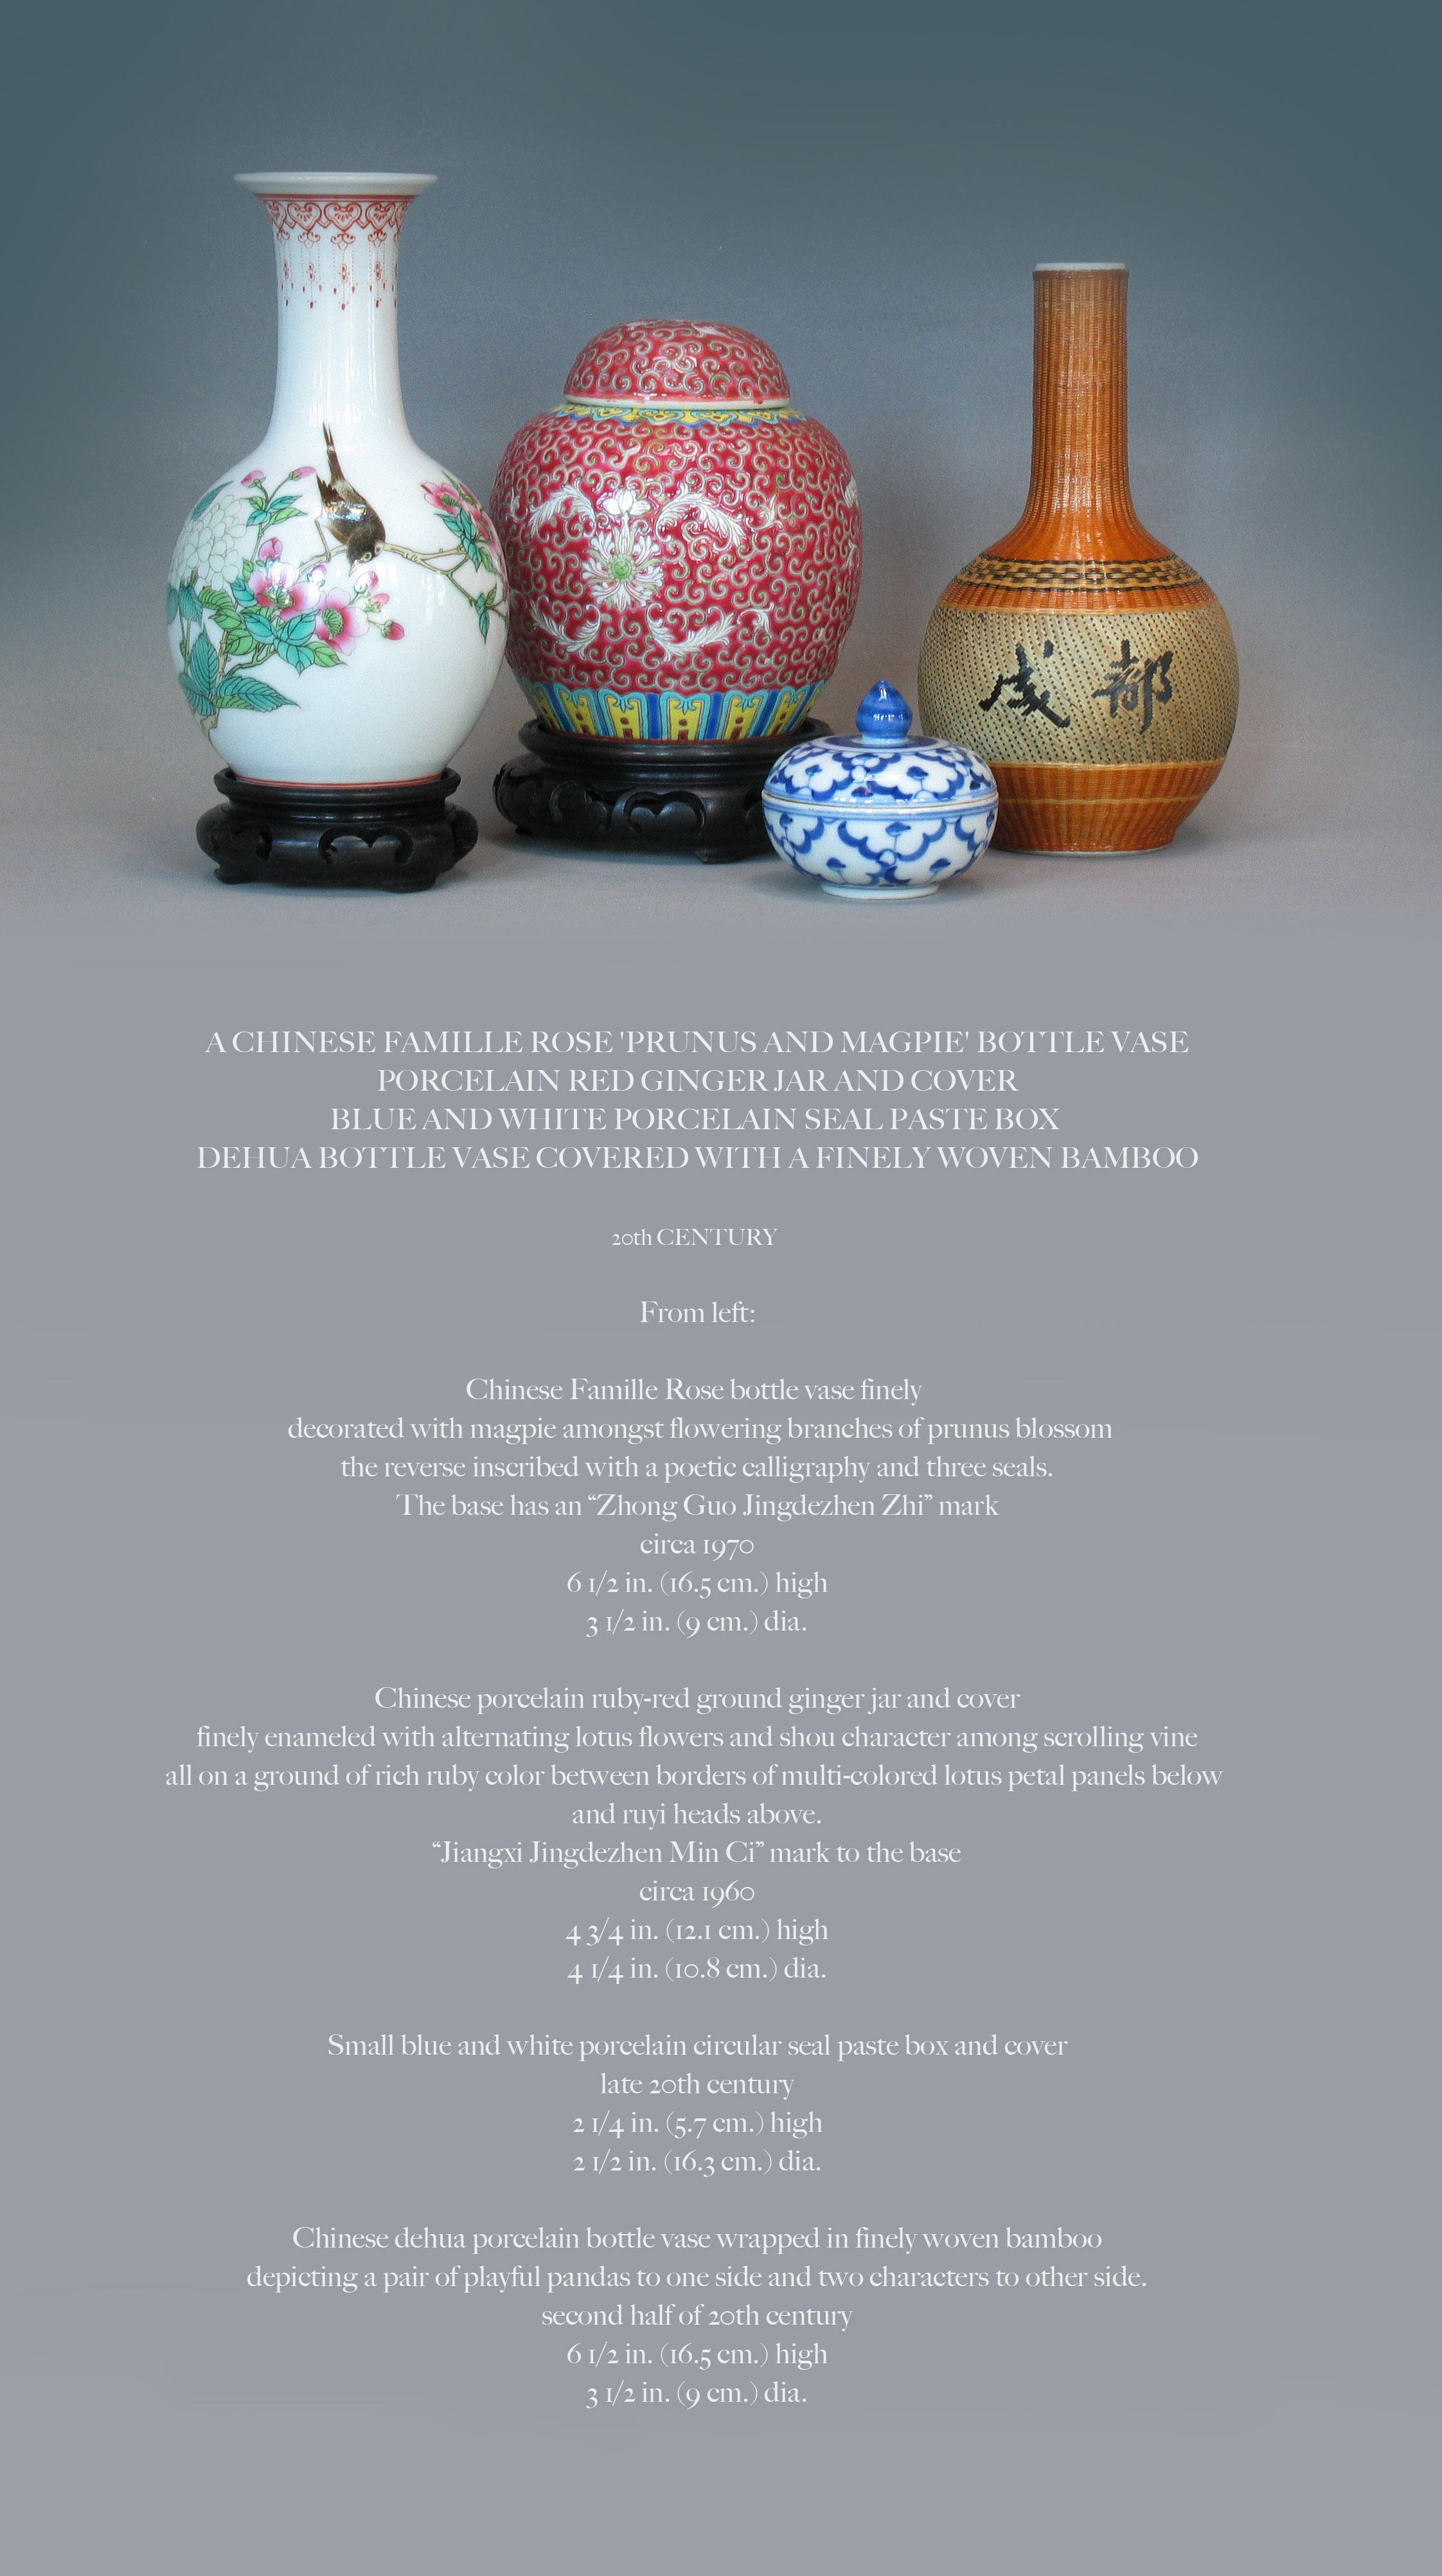 A Chinese Famille rose 'Prunus and Magpie' bottle vase
Porcelain red ginger jar and cover
Blue and white porcelain seal paste box
Dehua bottle vase covered with a finely woven bamboo

20th century

From left:

Chinese Famille rose bottle